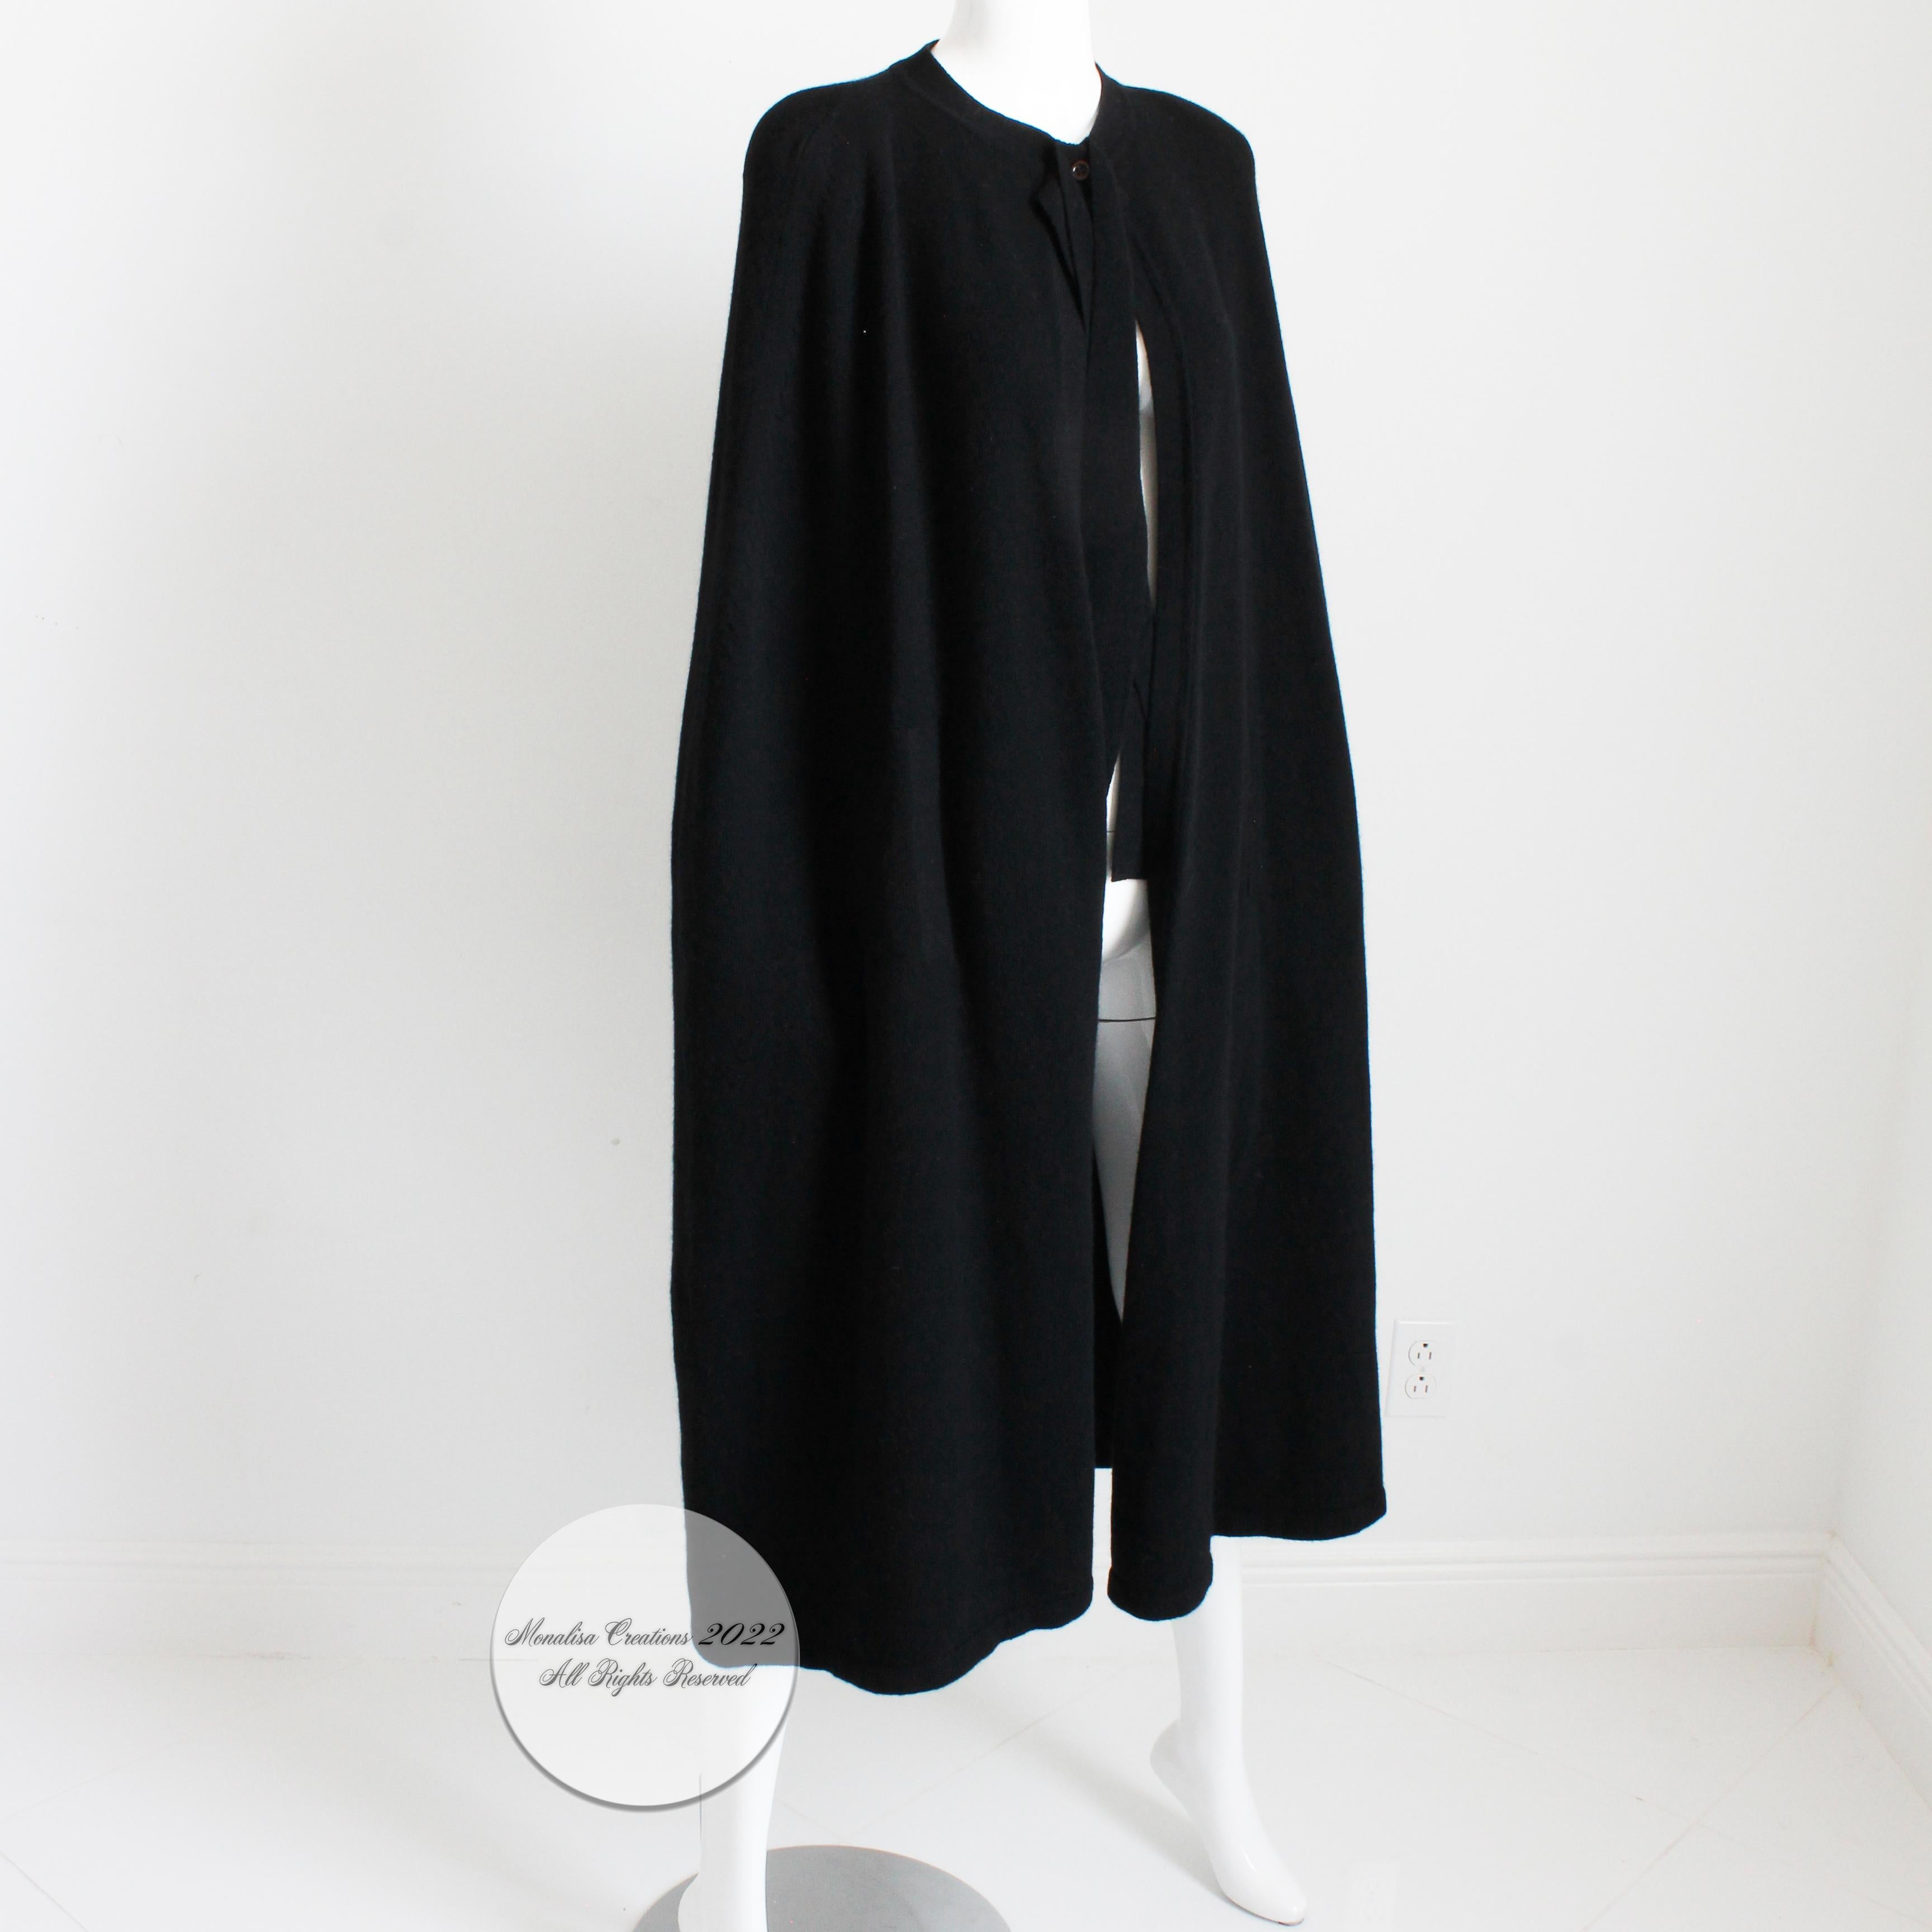 Fabulous Sonia Rykiel Angora Lambswool blend knit cape in black, likely made in the 90s.  Fastens with button at collar and knit wrap ties, and features small shoulder pads and arm holes.  So many ways to style and wear, it's definitely a wardrobe